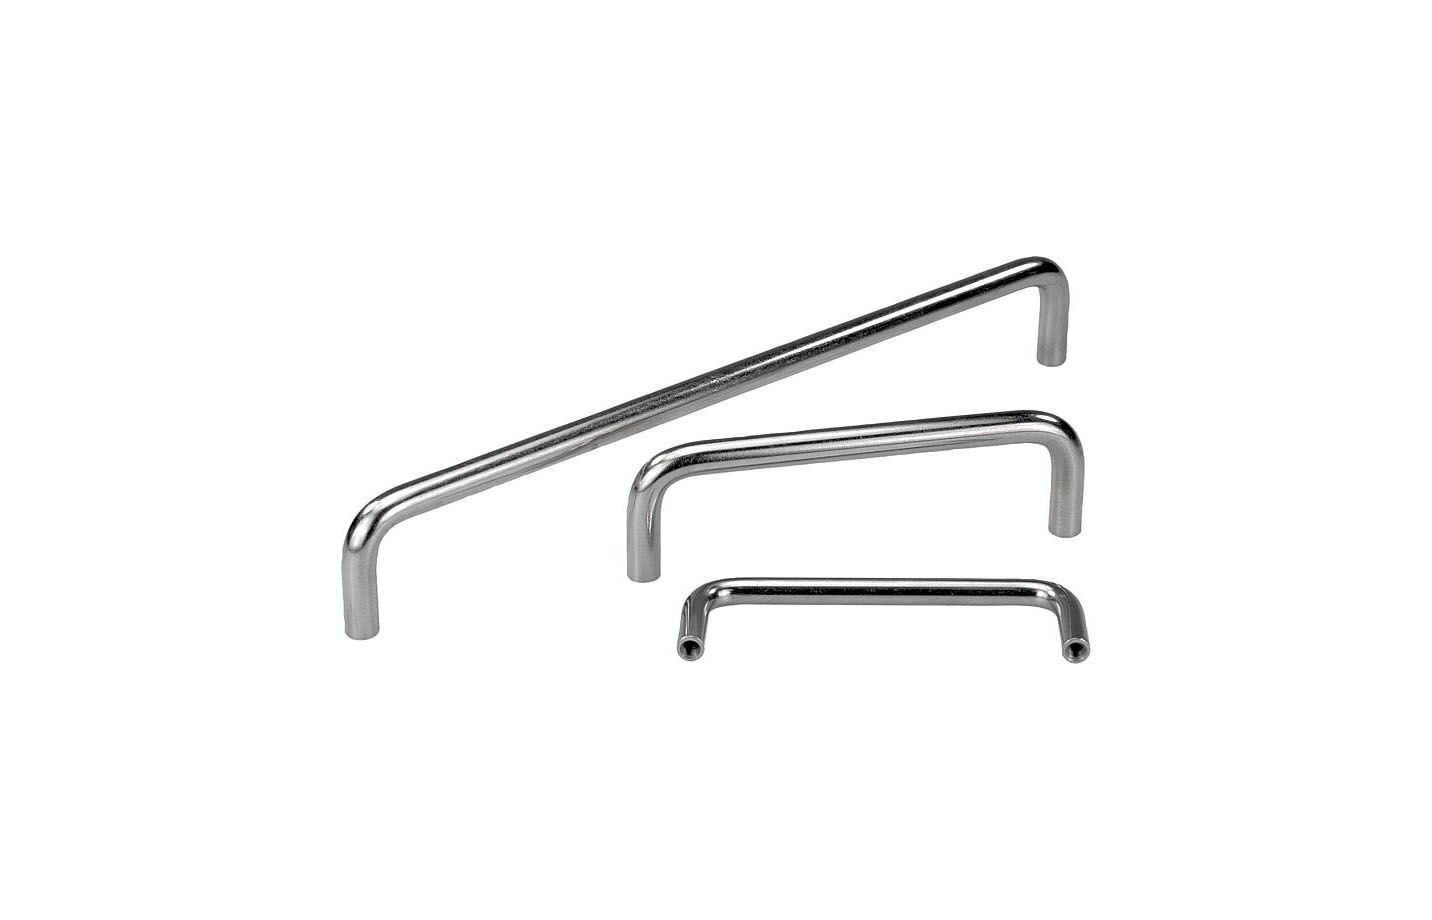 K0206_Pull Handles stainless steel, round profile